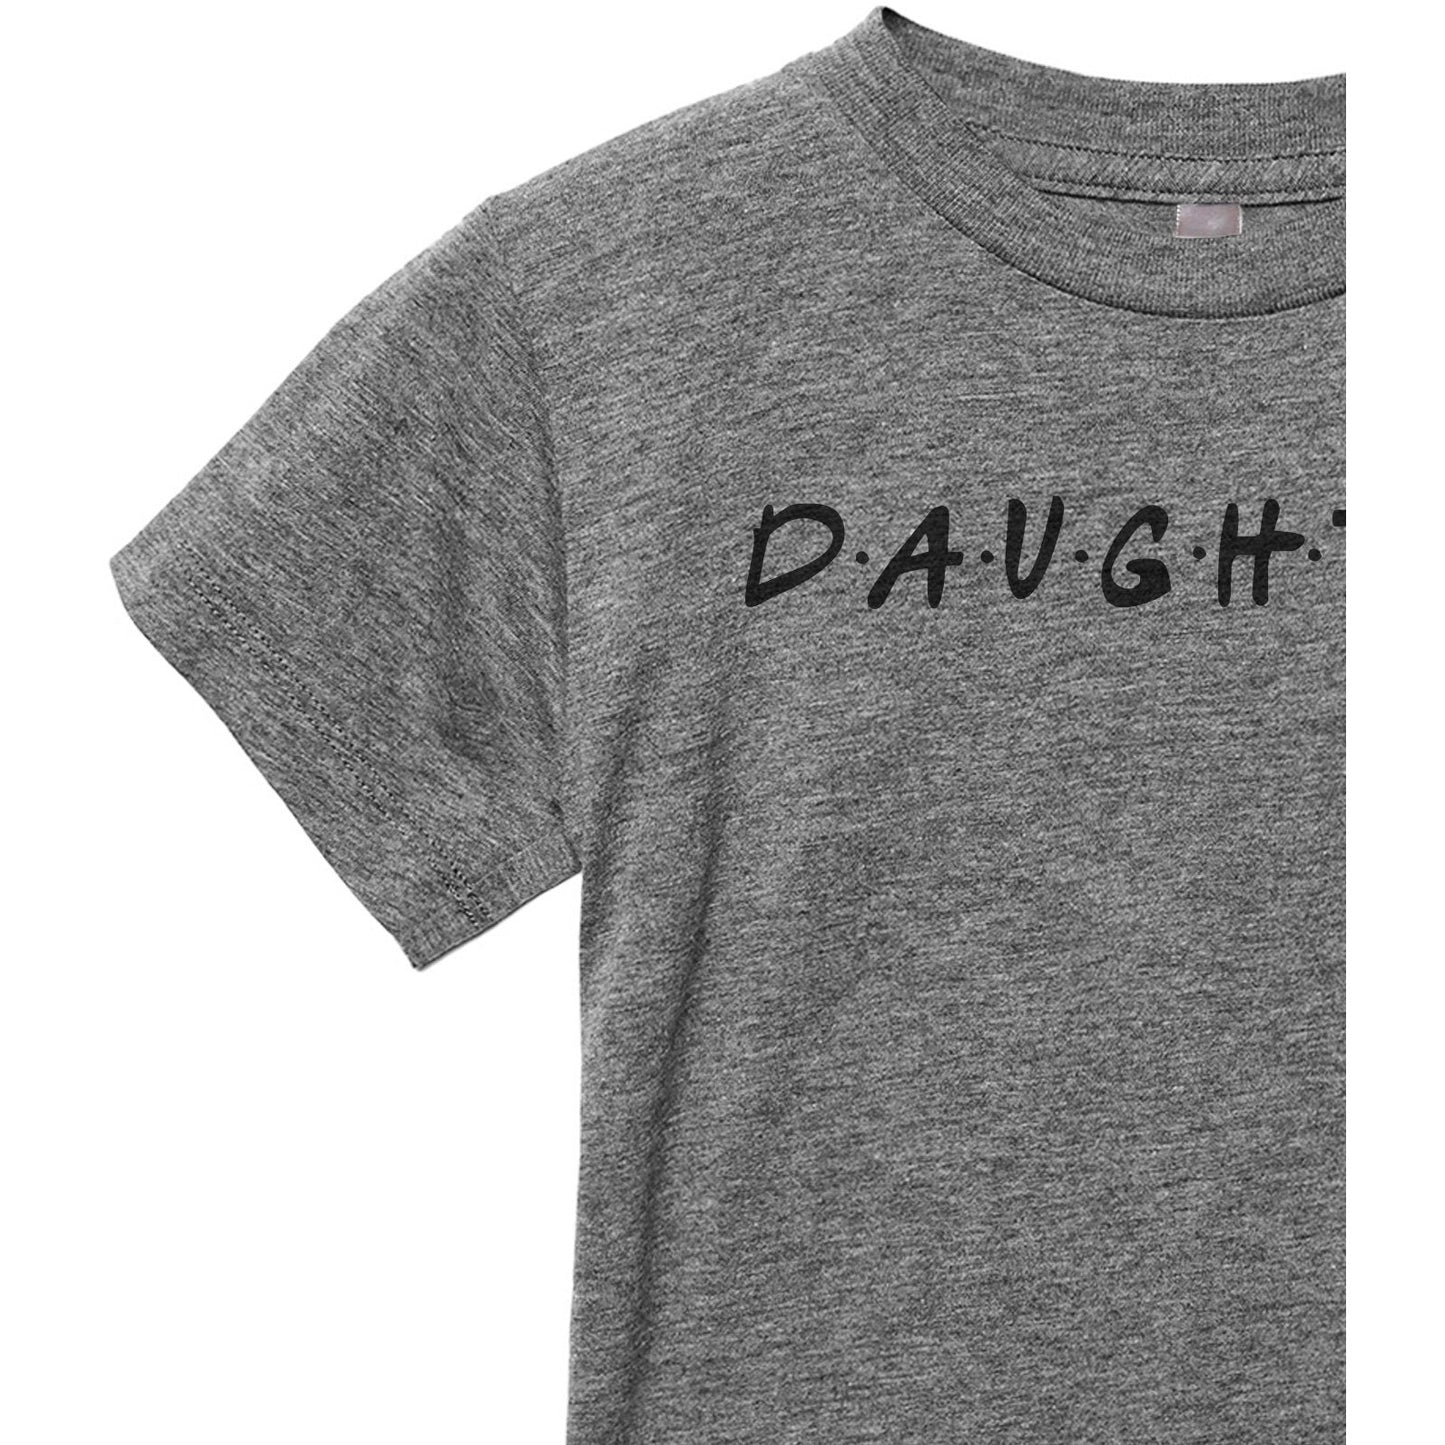 Daughter Friends Toddler's Go-To Crewneck Tee Heather Grey Zoom Details A